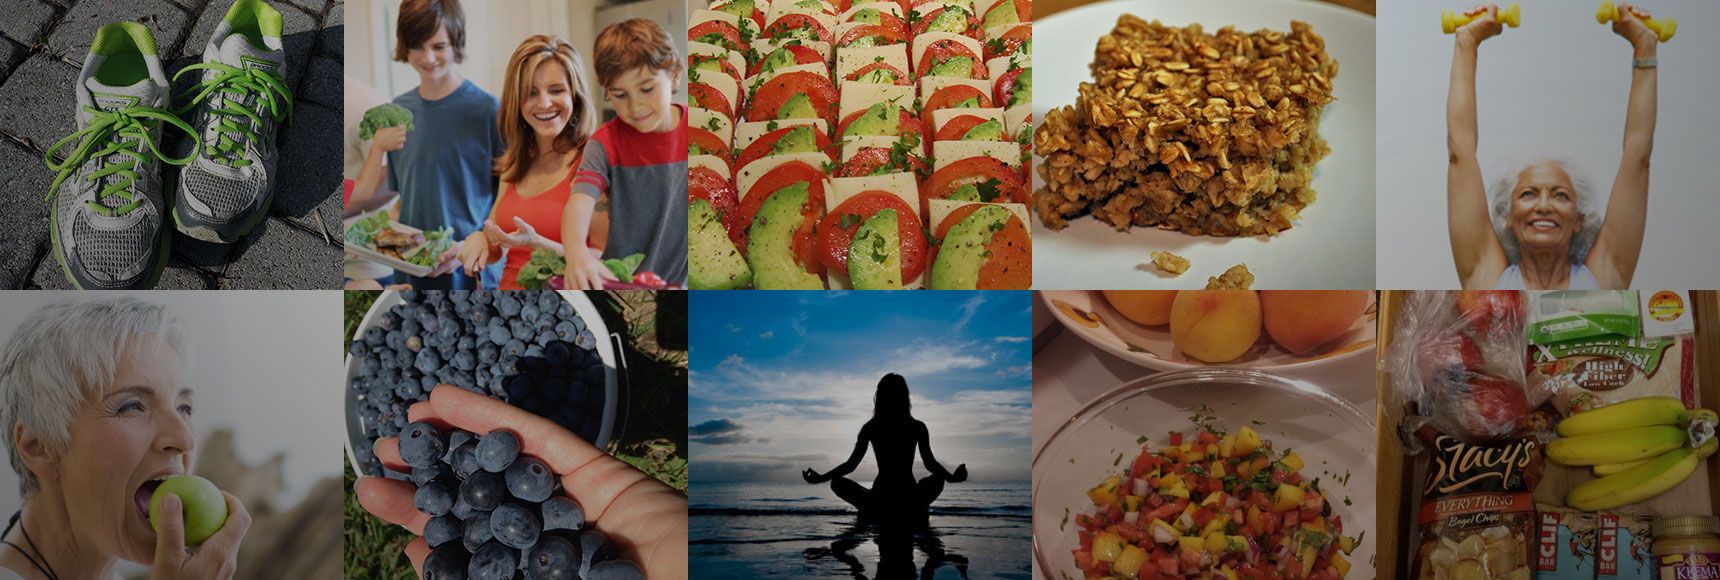 A grid of random stock photos related to dieting and exercise